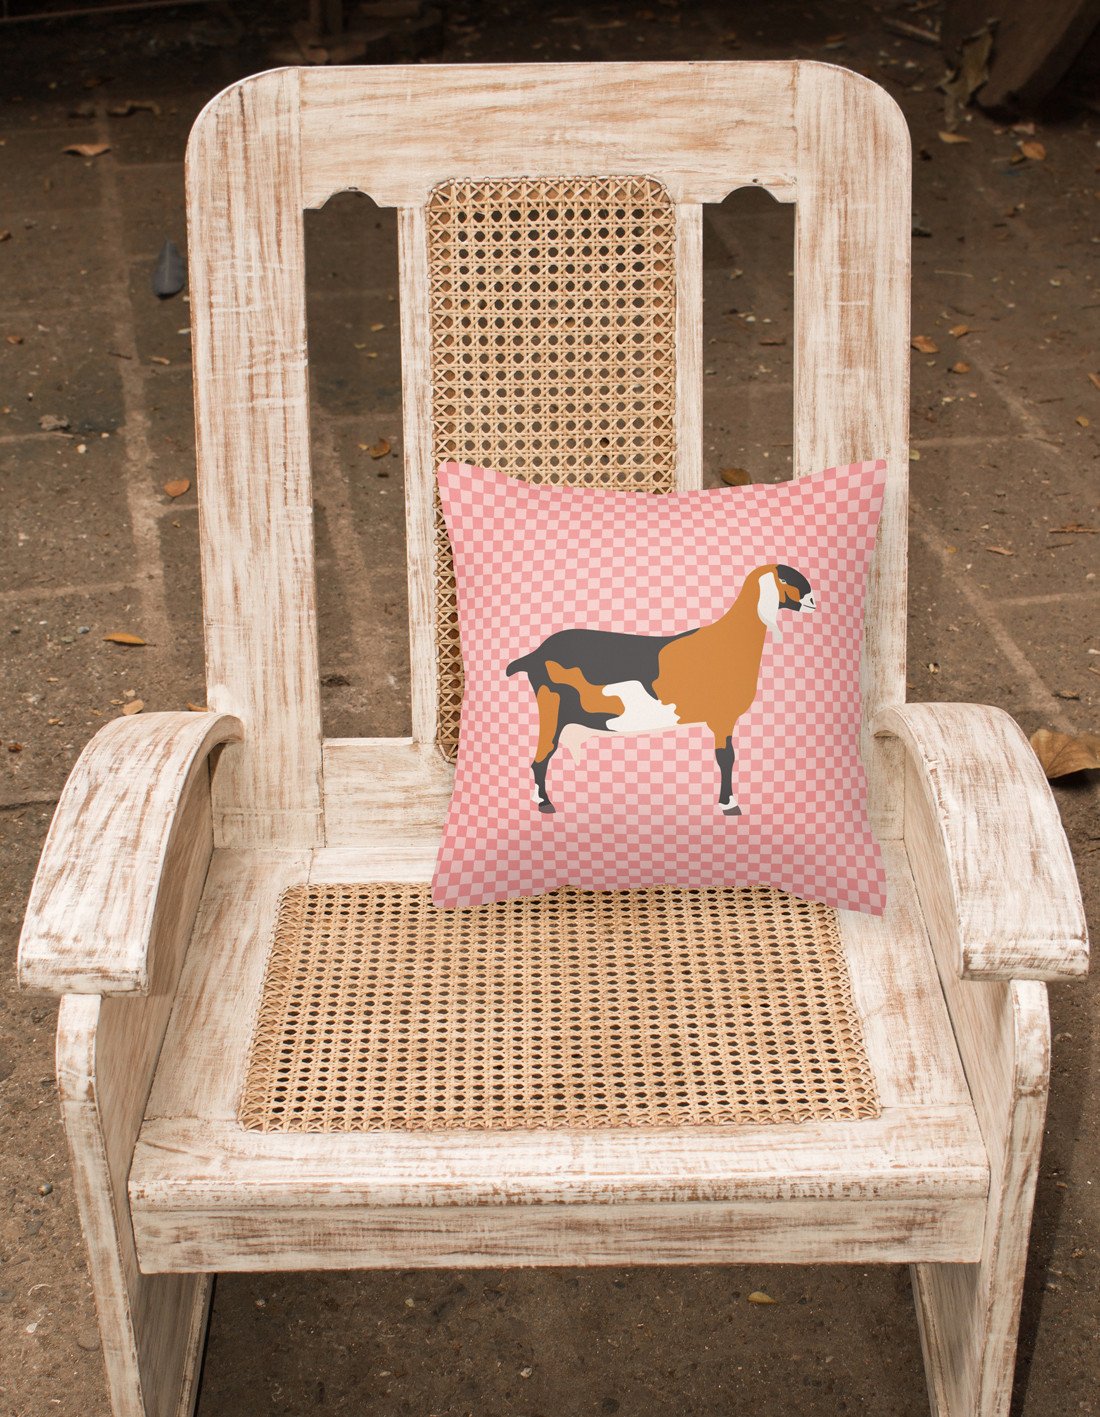 Anglo-nubian Nubian Goat Pink Check Fabric Decorative Pillow BB7883PW1818 by Caroline's Treasures